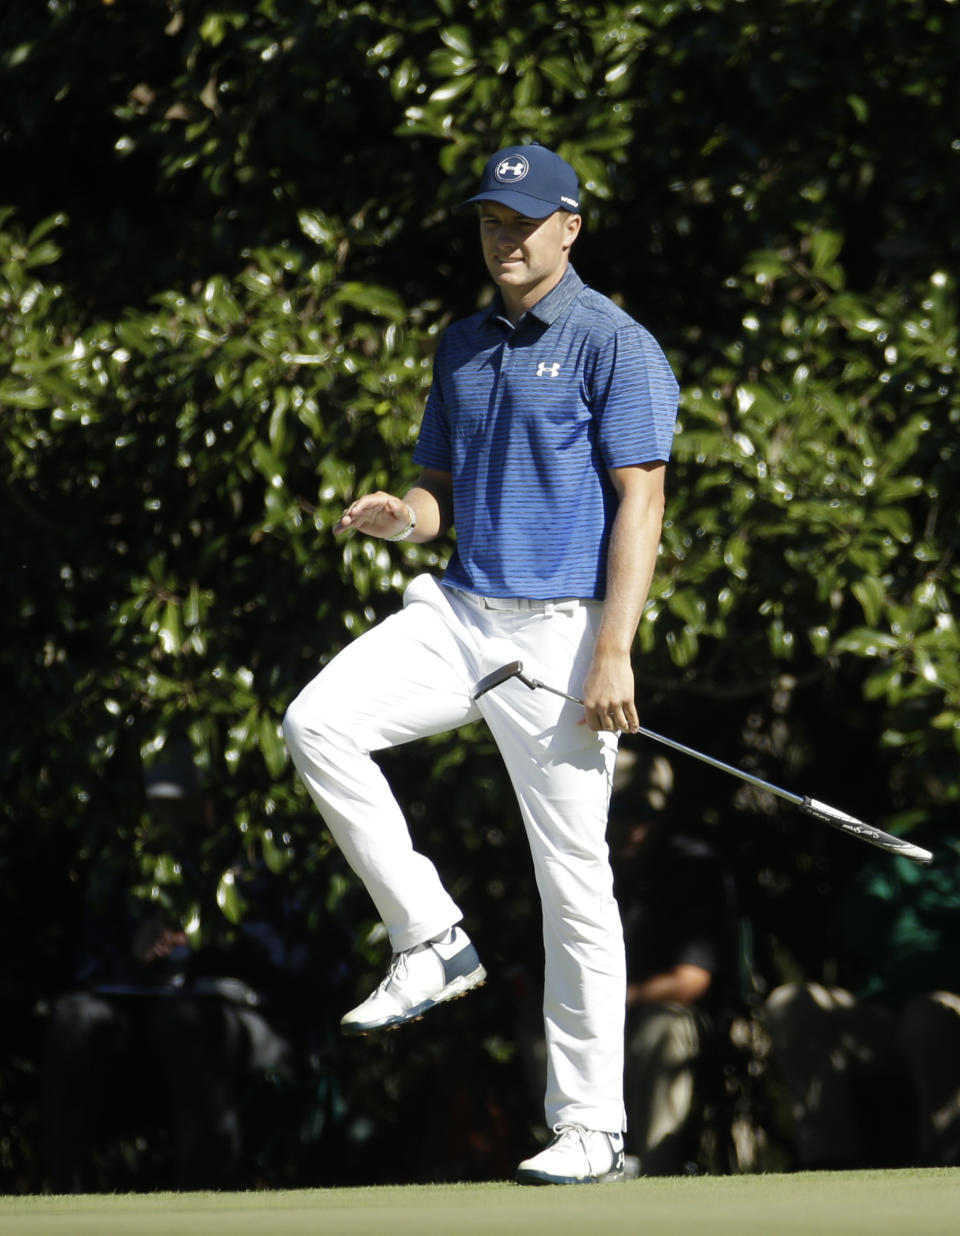 Jordan Spieth reacts to his putt on the 11th hole during the third round of the Masters golf tournament Saturday, April 8, 2017, in Augusta, Ga. (AP Photo/Charlie Riedel)